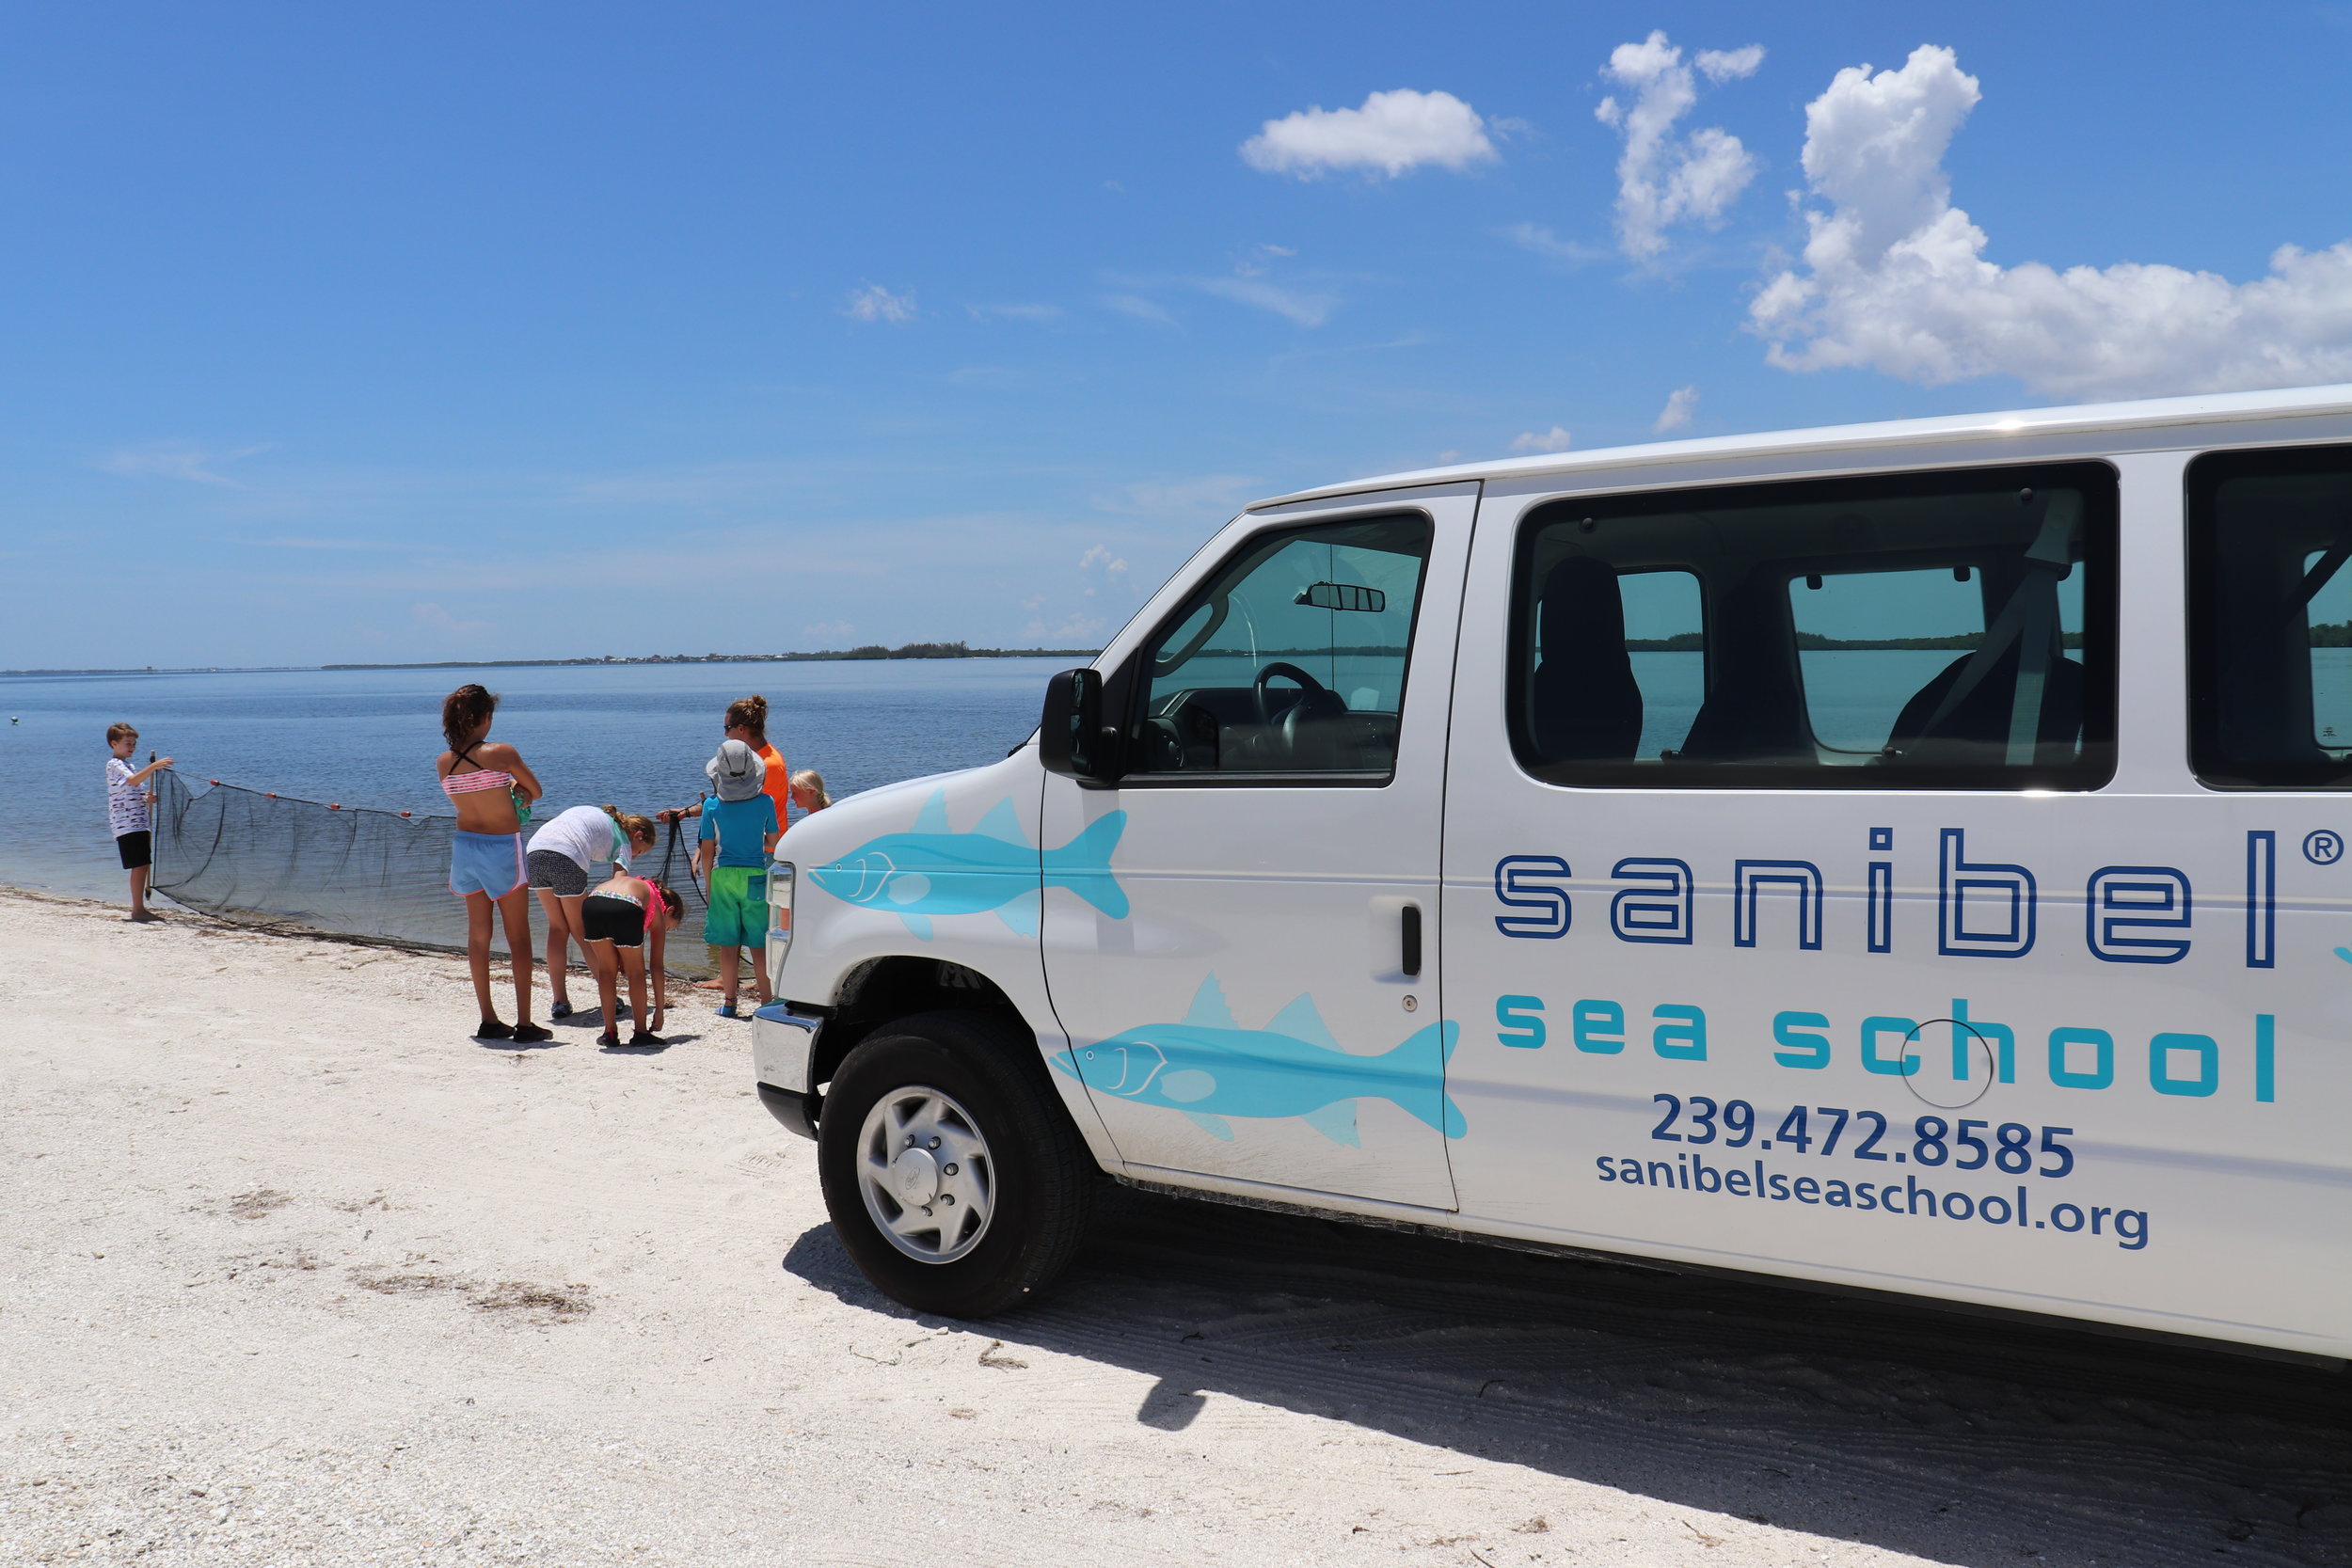 Sanibel Sea School's vehicles are often parked in public areas where the need for an AED could arise.&nbsp;